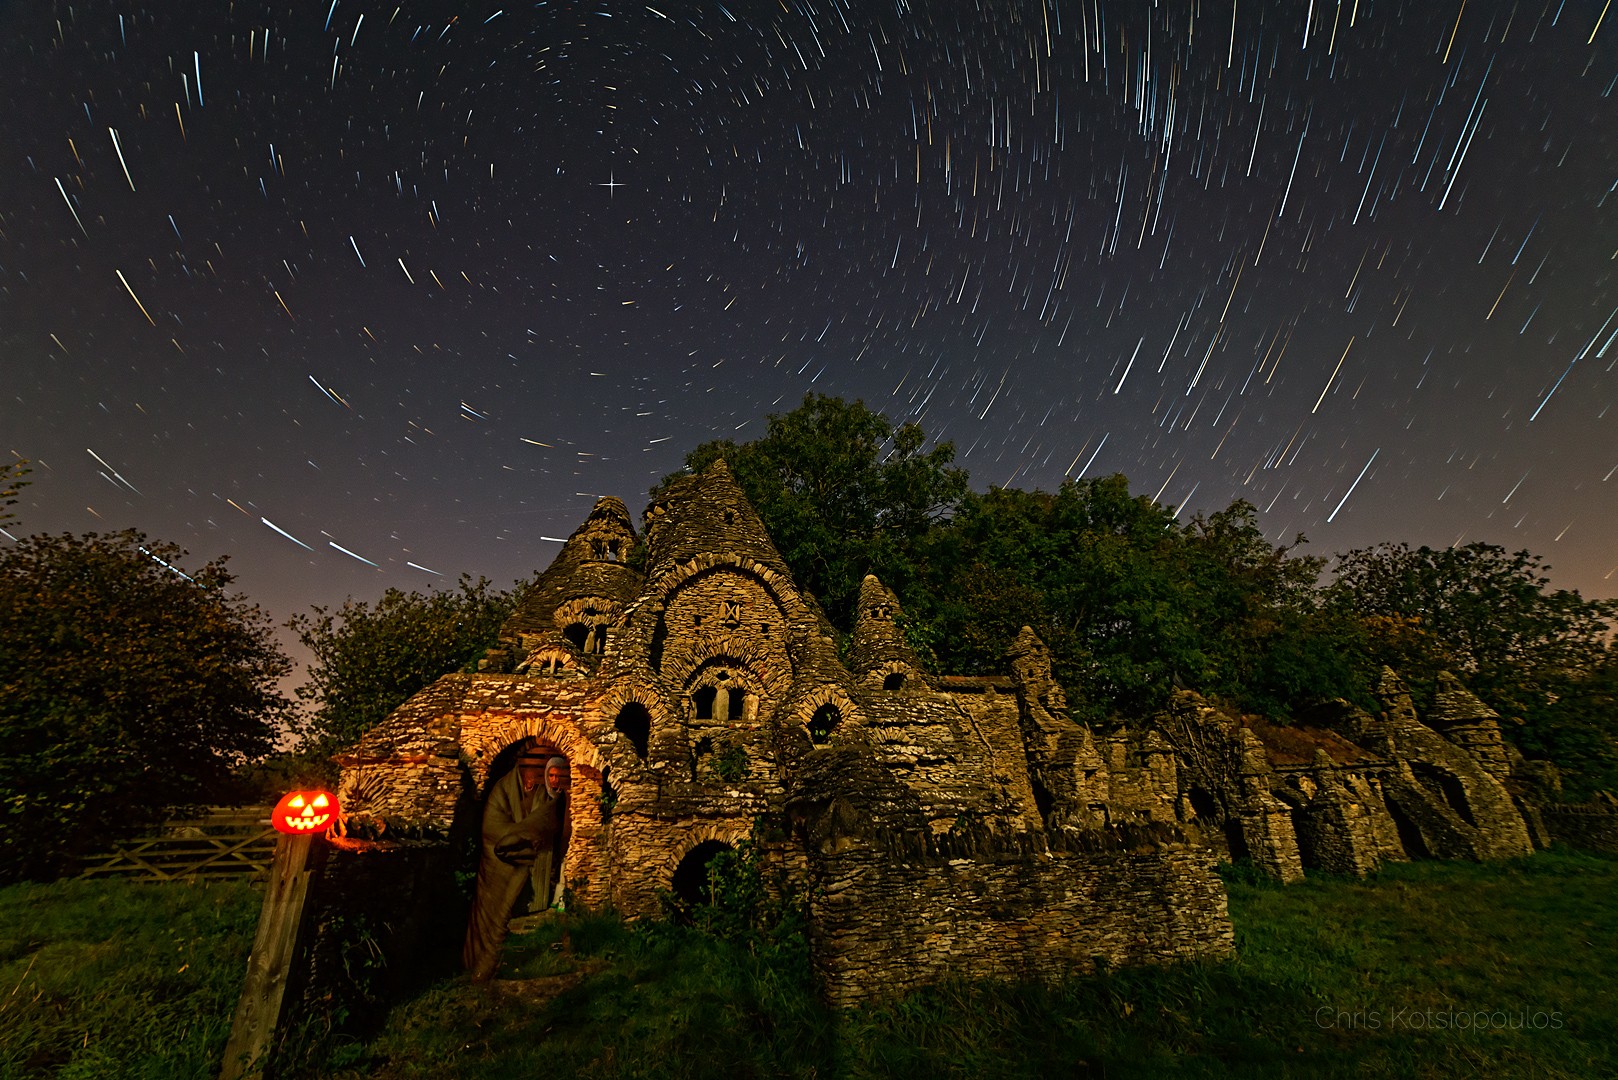 General 1618x1080 space universe stars blurred ruins long exposure star trails outdoors